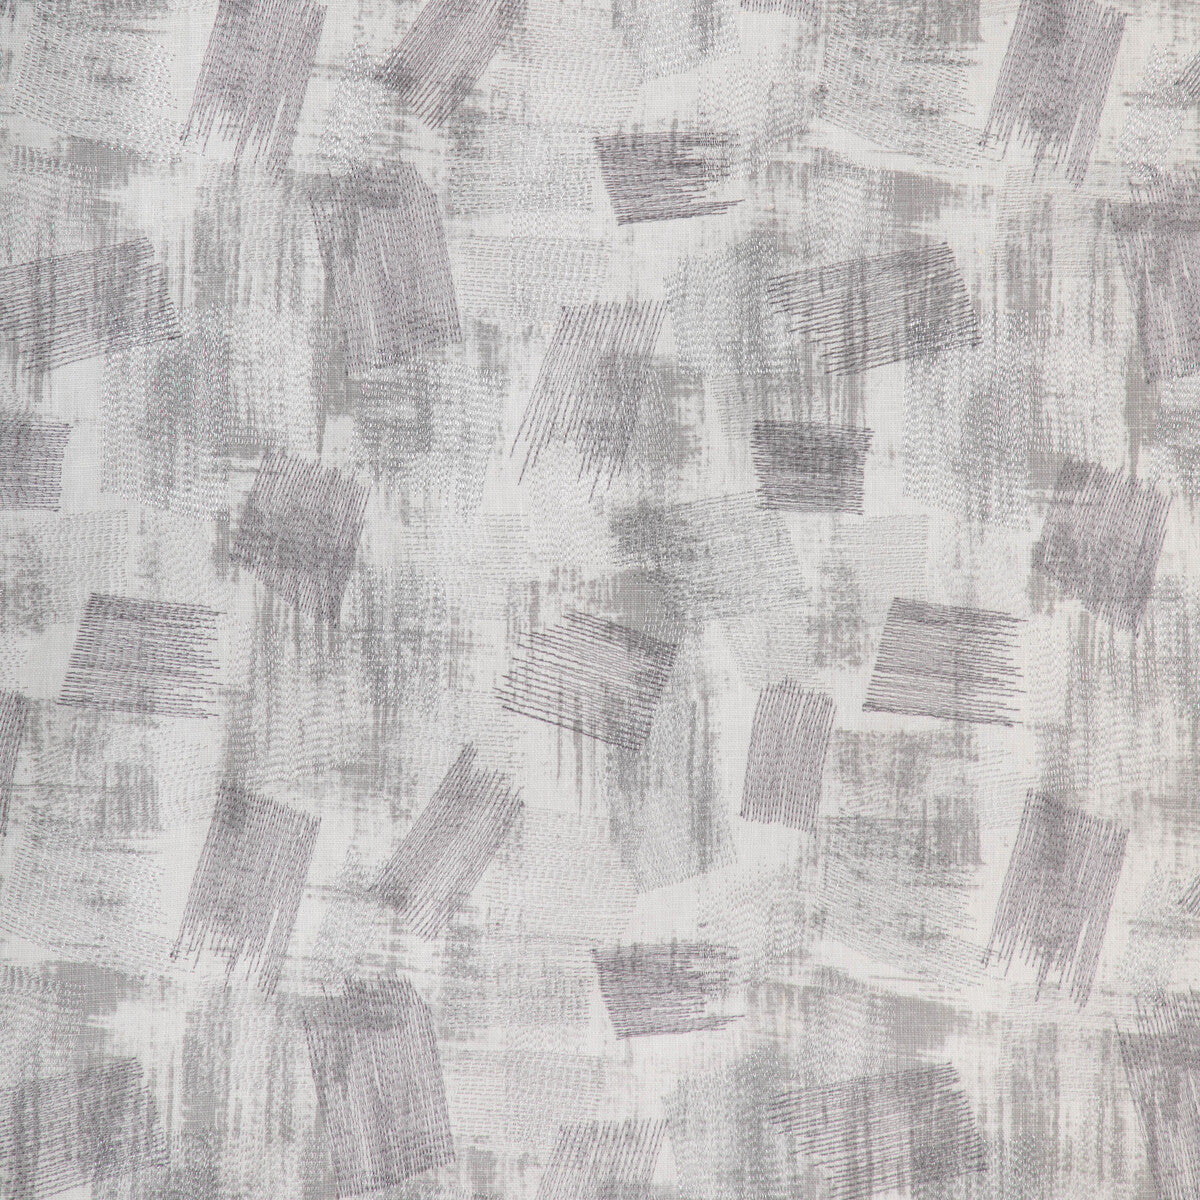 Bedazzled fabric in pewter color - pattern 5002.11.0 - by Kravet Design in the Candice Olson collection